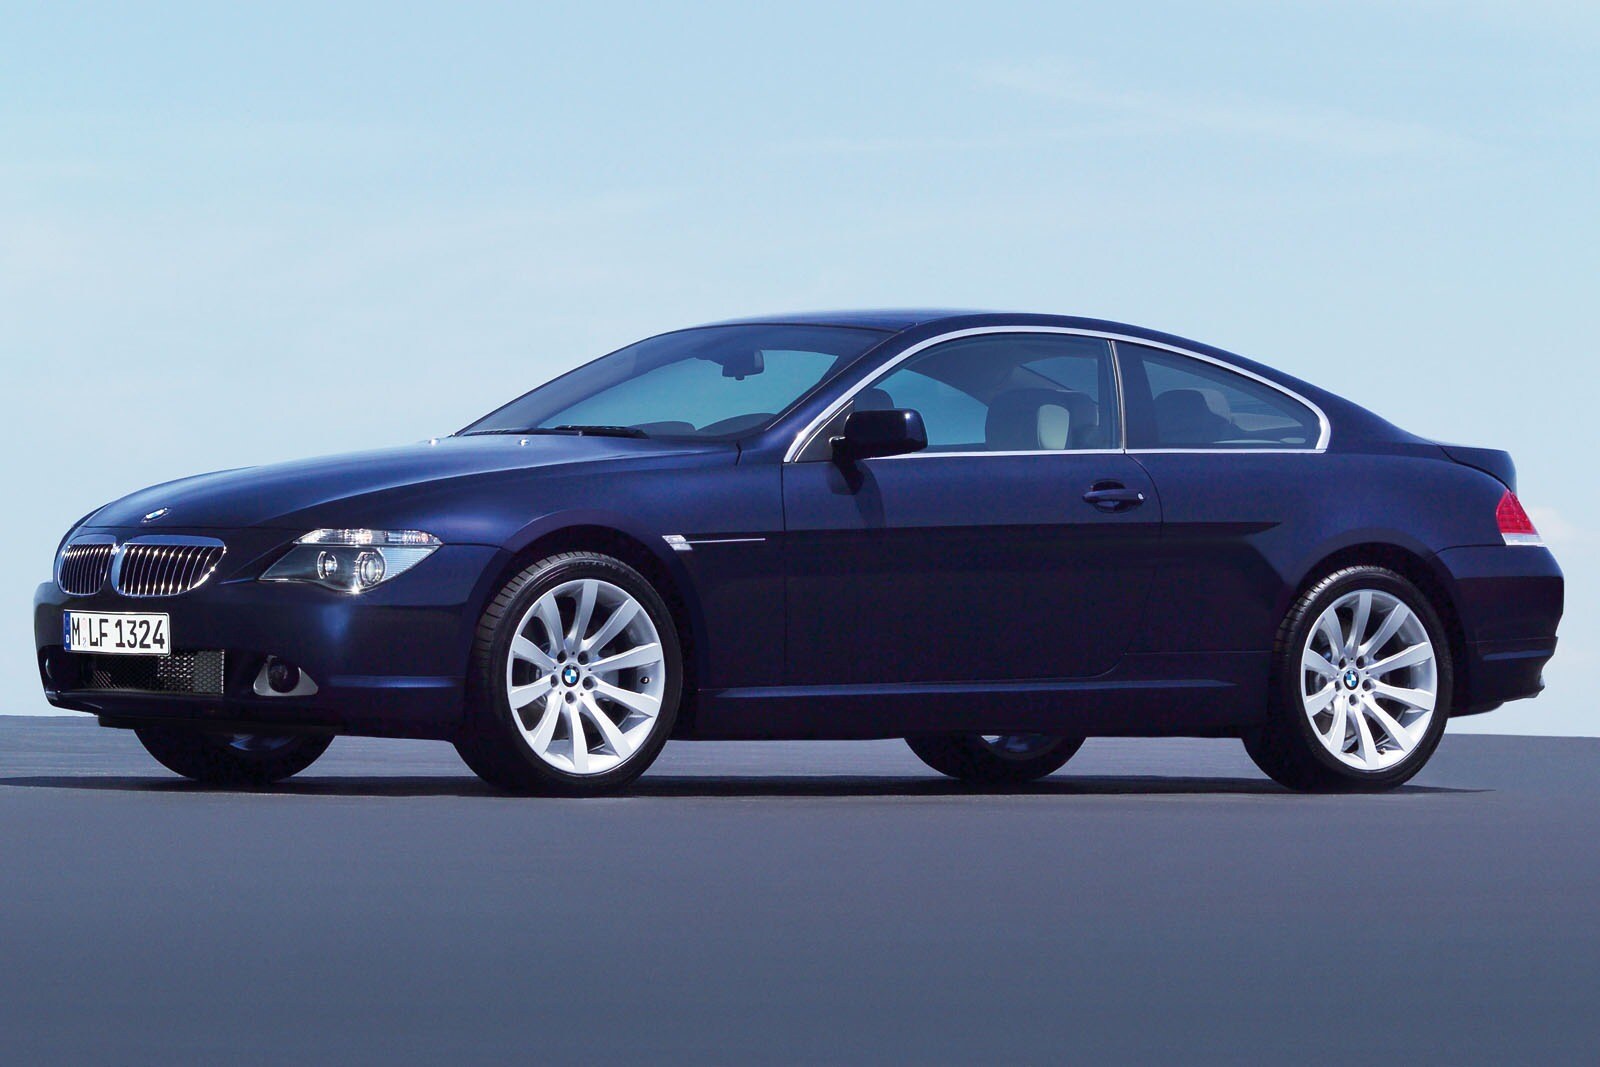 Used 2007 BMW 6 Series Coupe Review | Edmunds